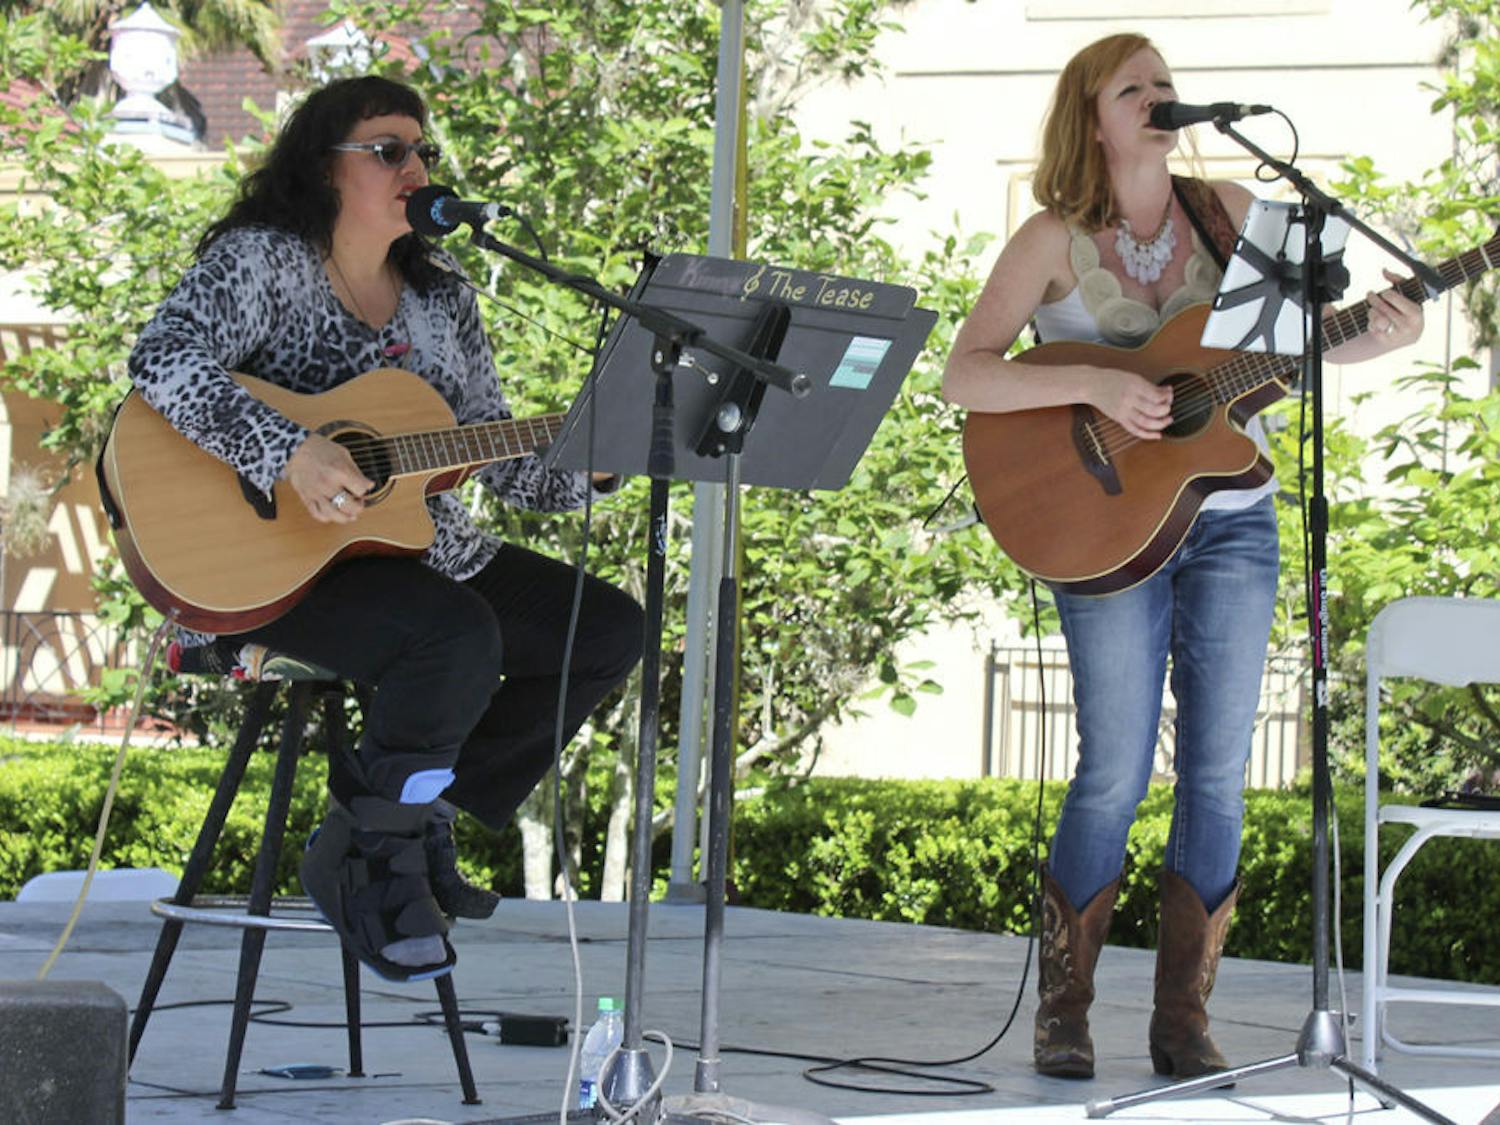 Kim LeCouteur and Amber Waters perform as the duo Damaged Daughters in the gardens of the Historic Thomas Center on Sunday during the Santa Fe Spring Arts Festival. Damaged Daughters is a folk/americana duo based out of Gainesville that performs throughout North Central Florida.